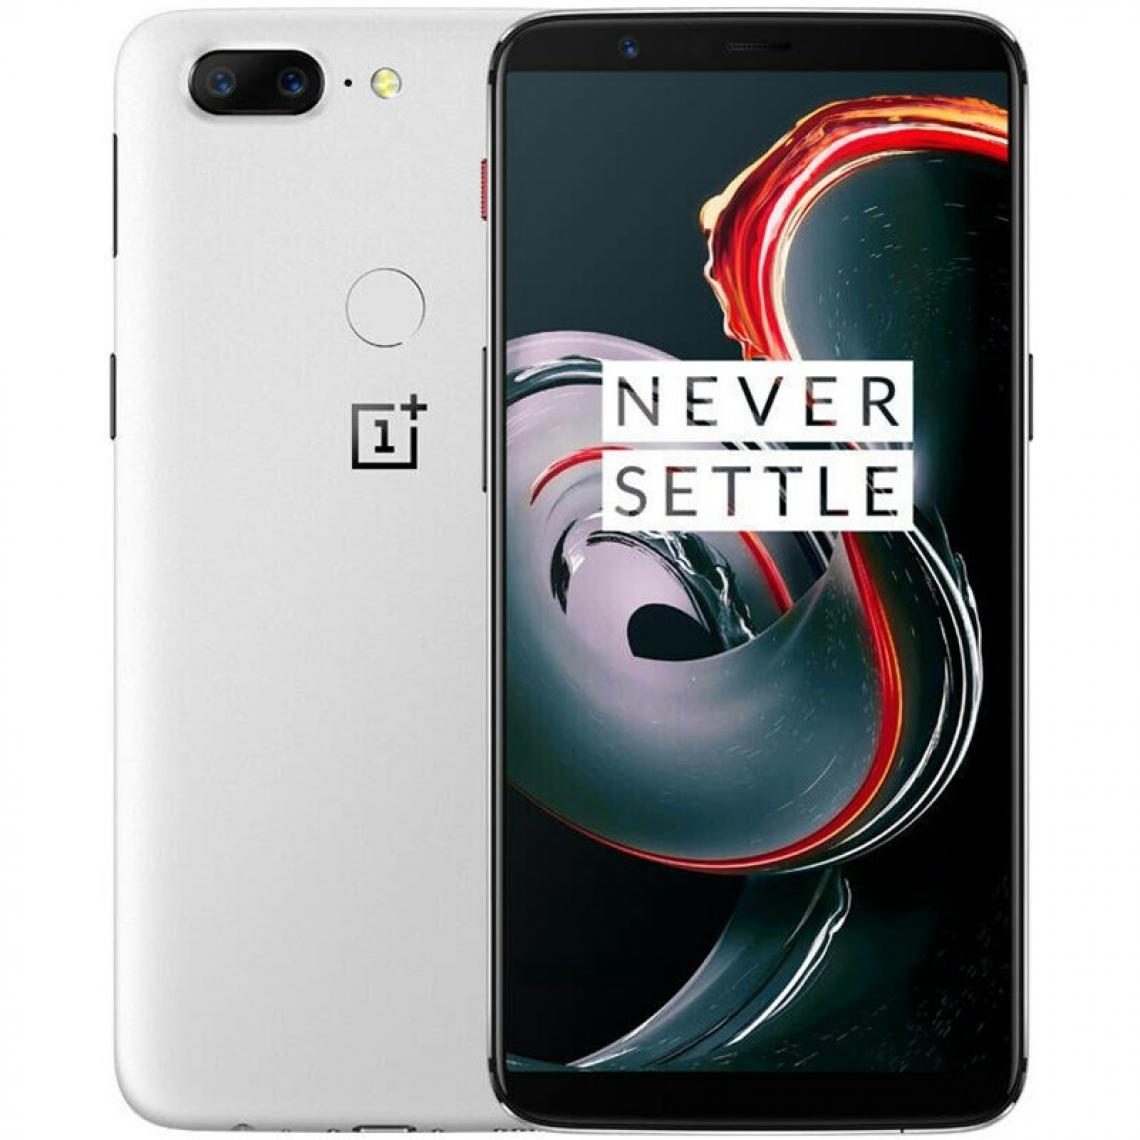 Oneplus - OnePlus 5T - Smartphone Android